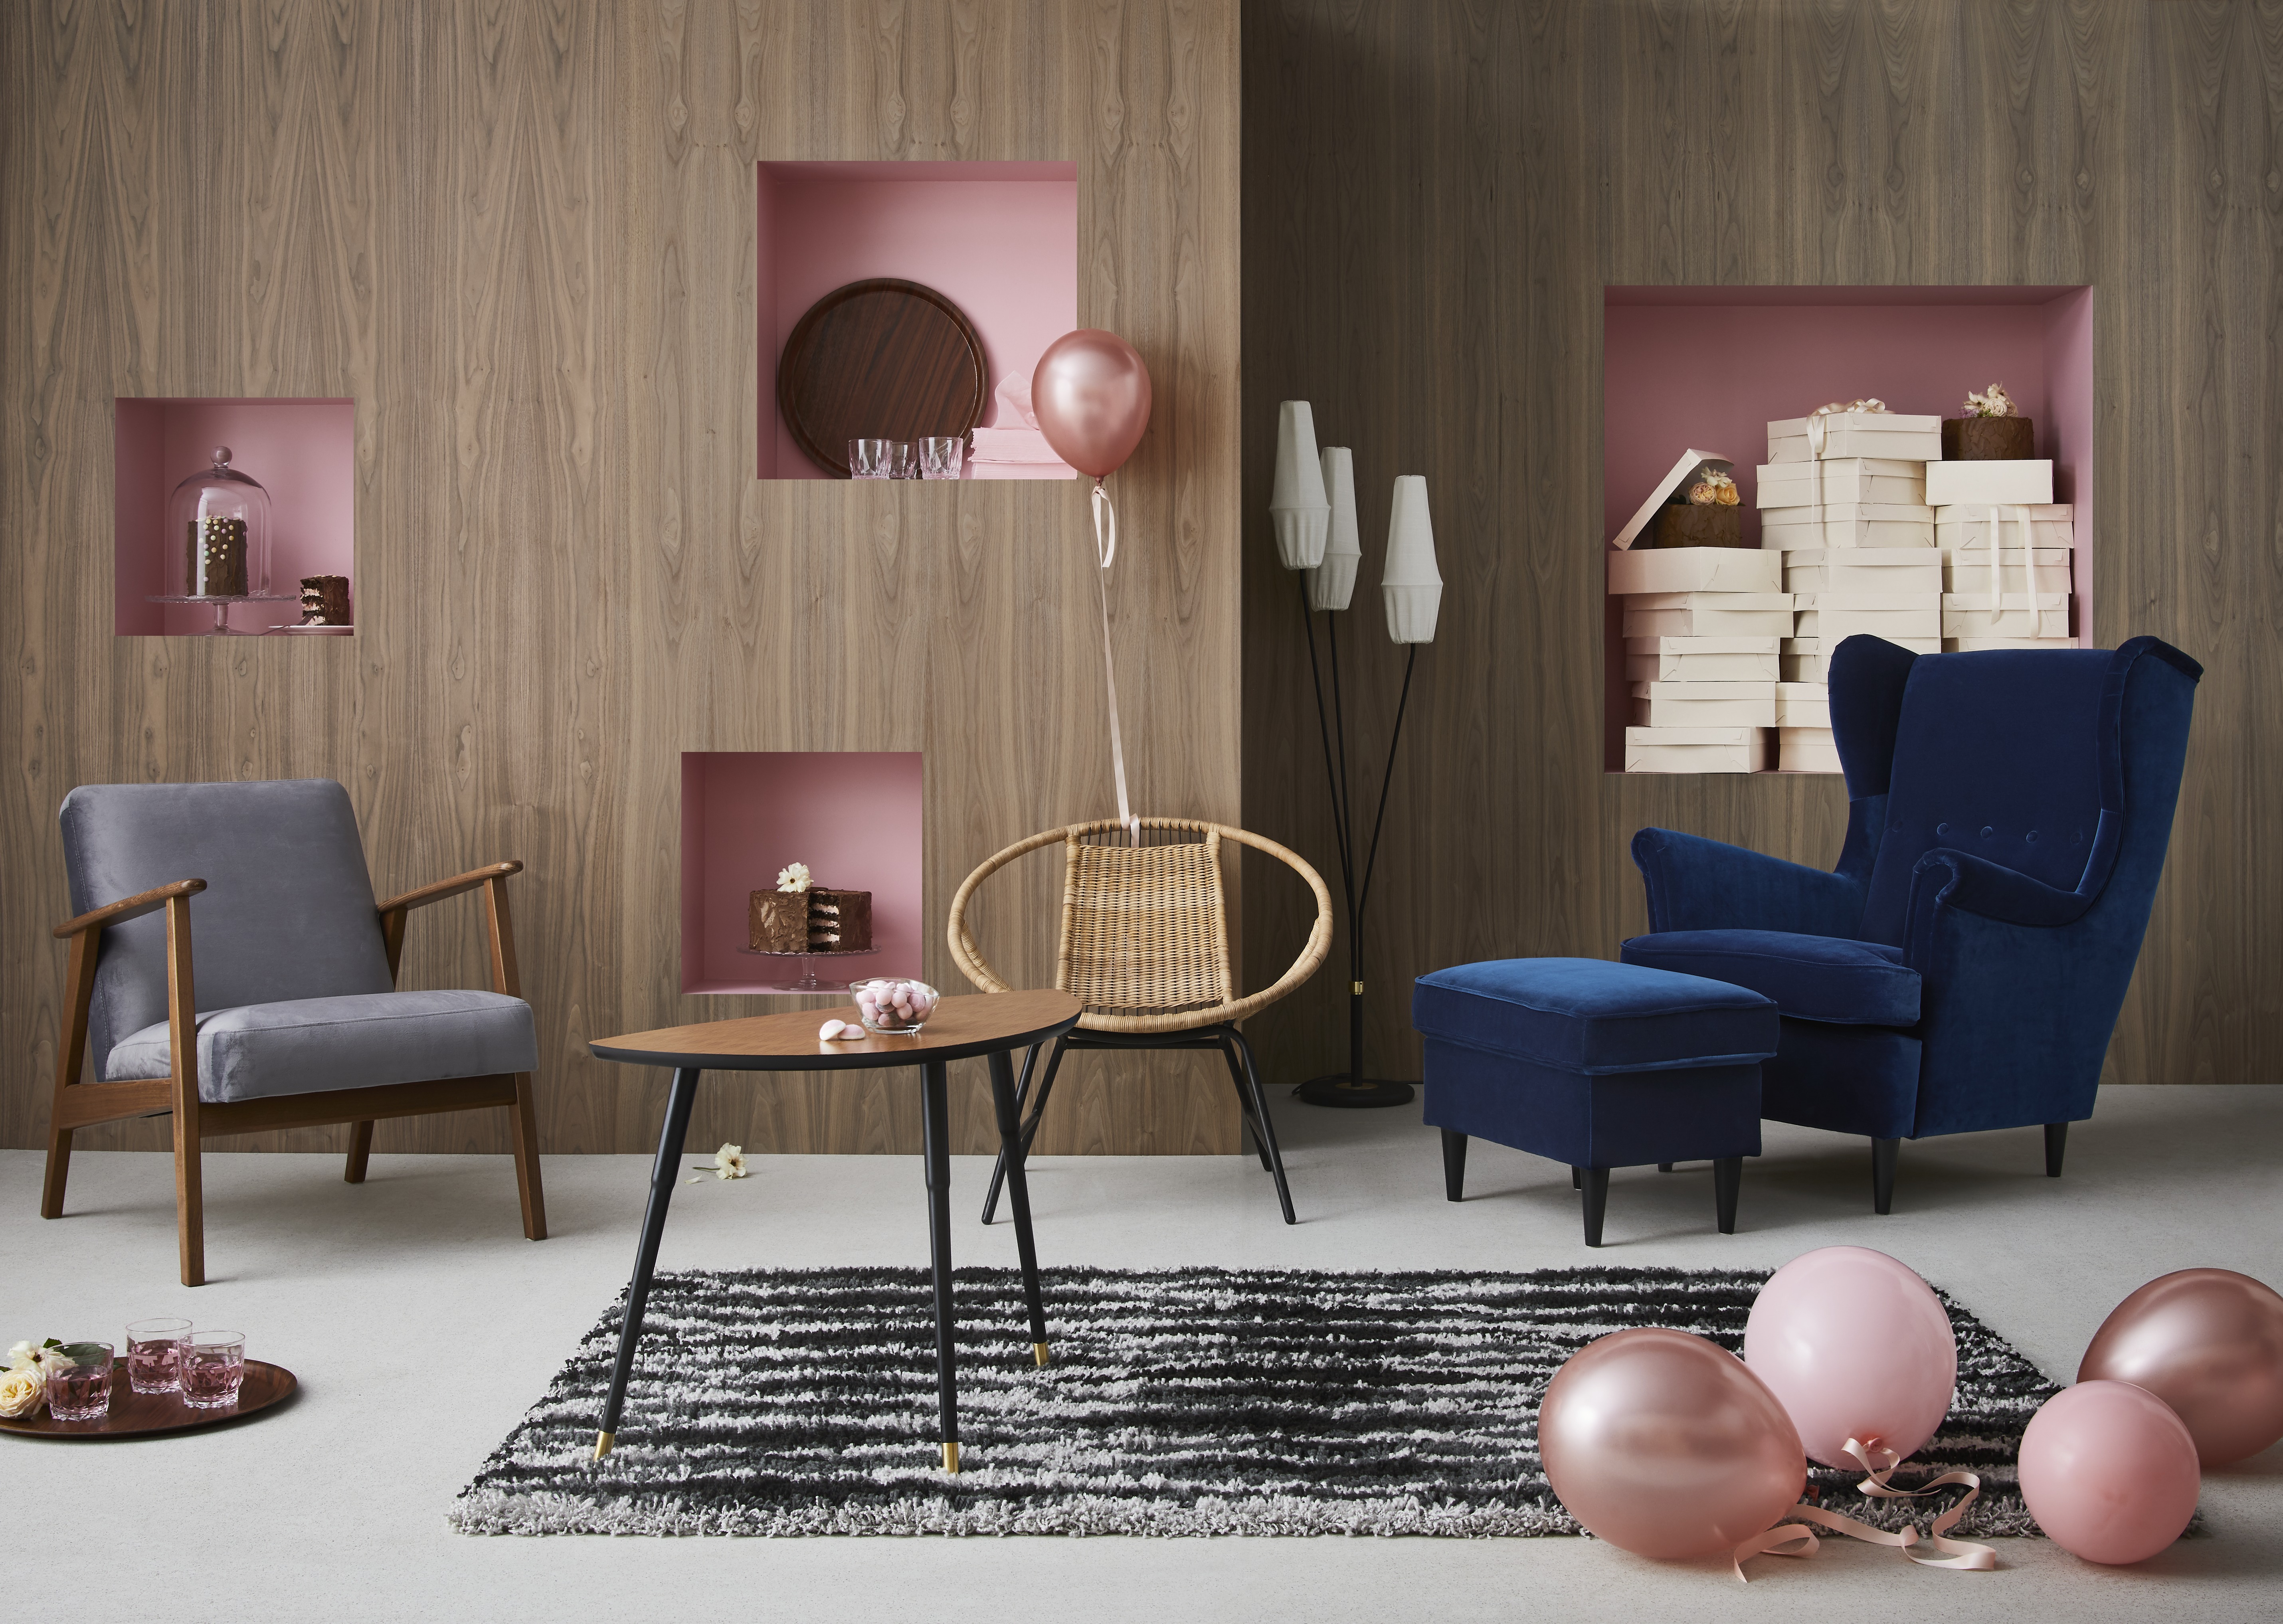 Ikea S New Collection Reimagines Some Of Their Classics And It S